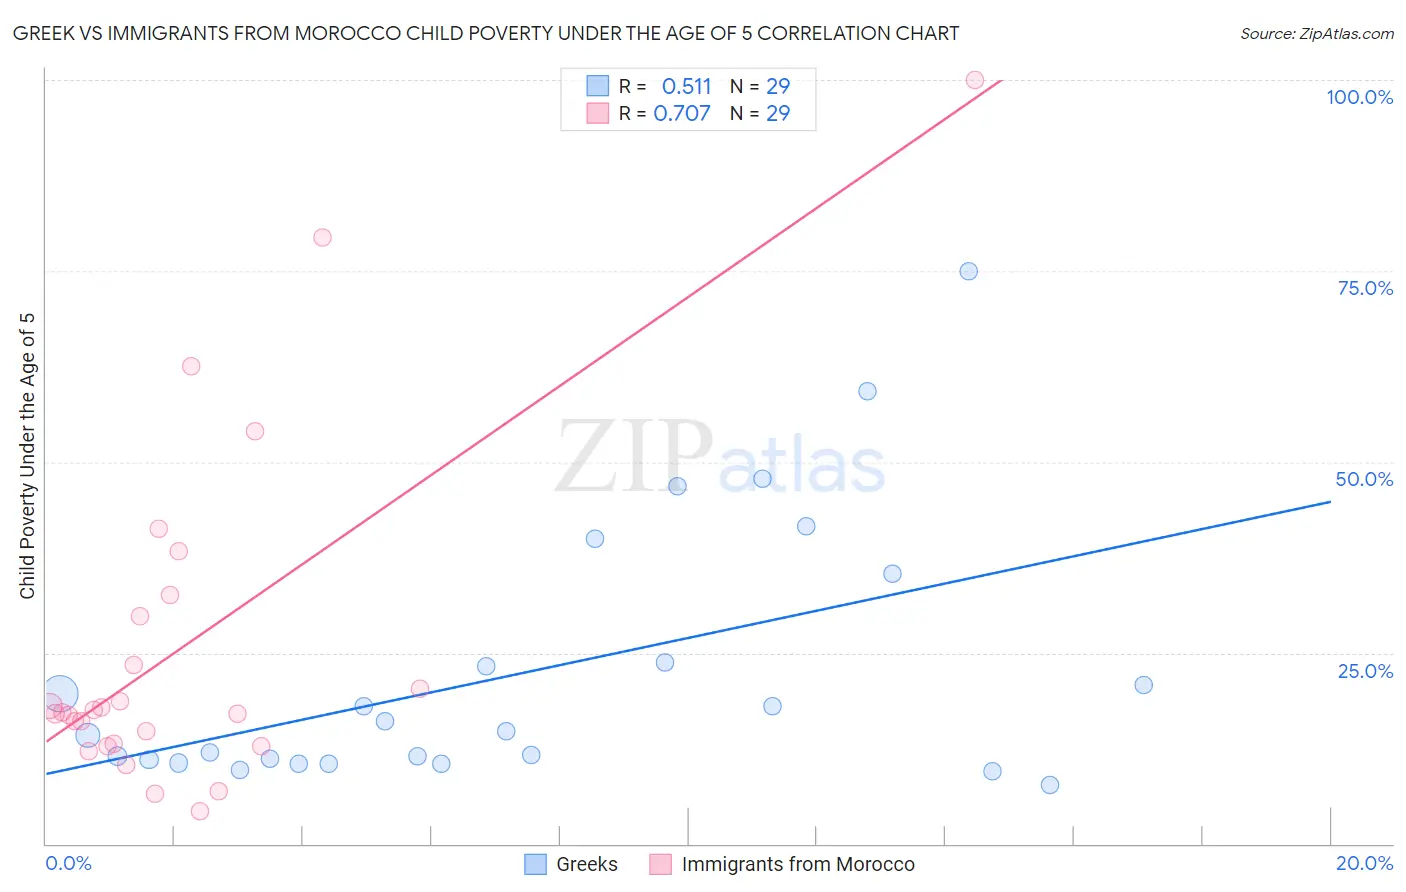 Greek vs Immigrants from Morocco Child Poverty Under the Age of 5